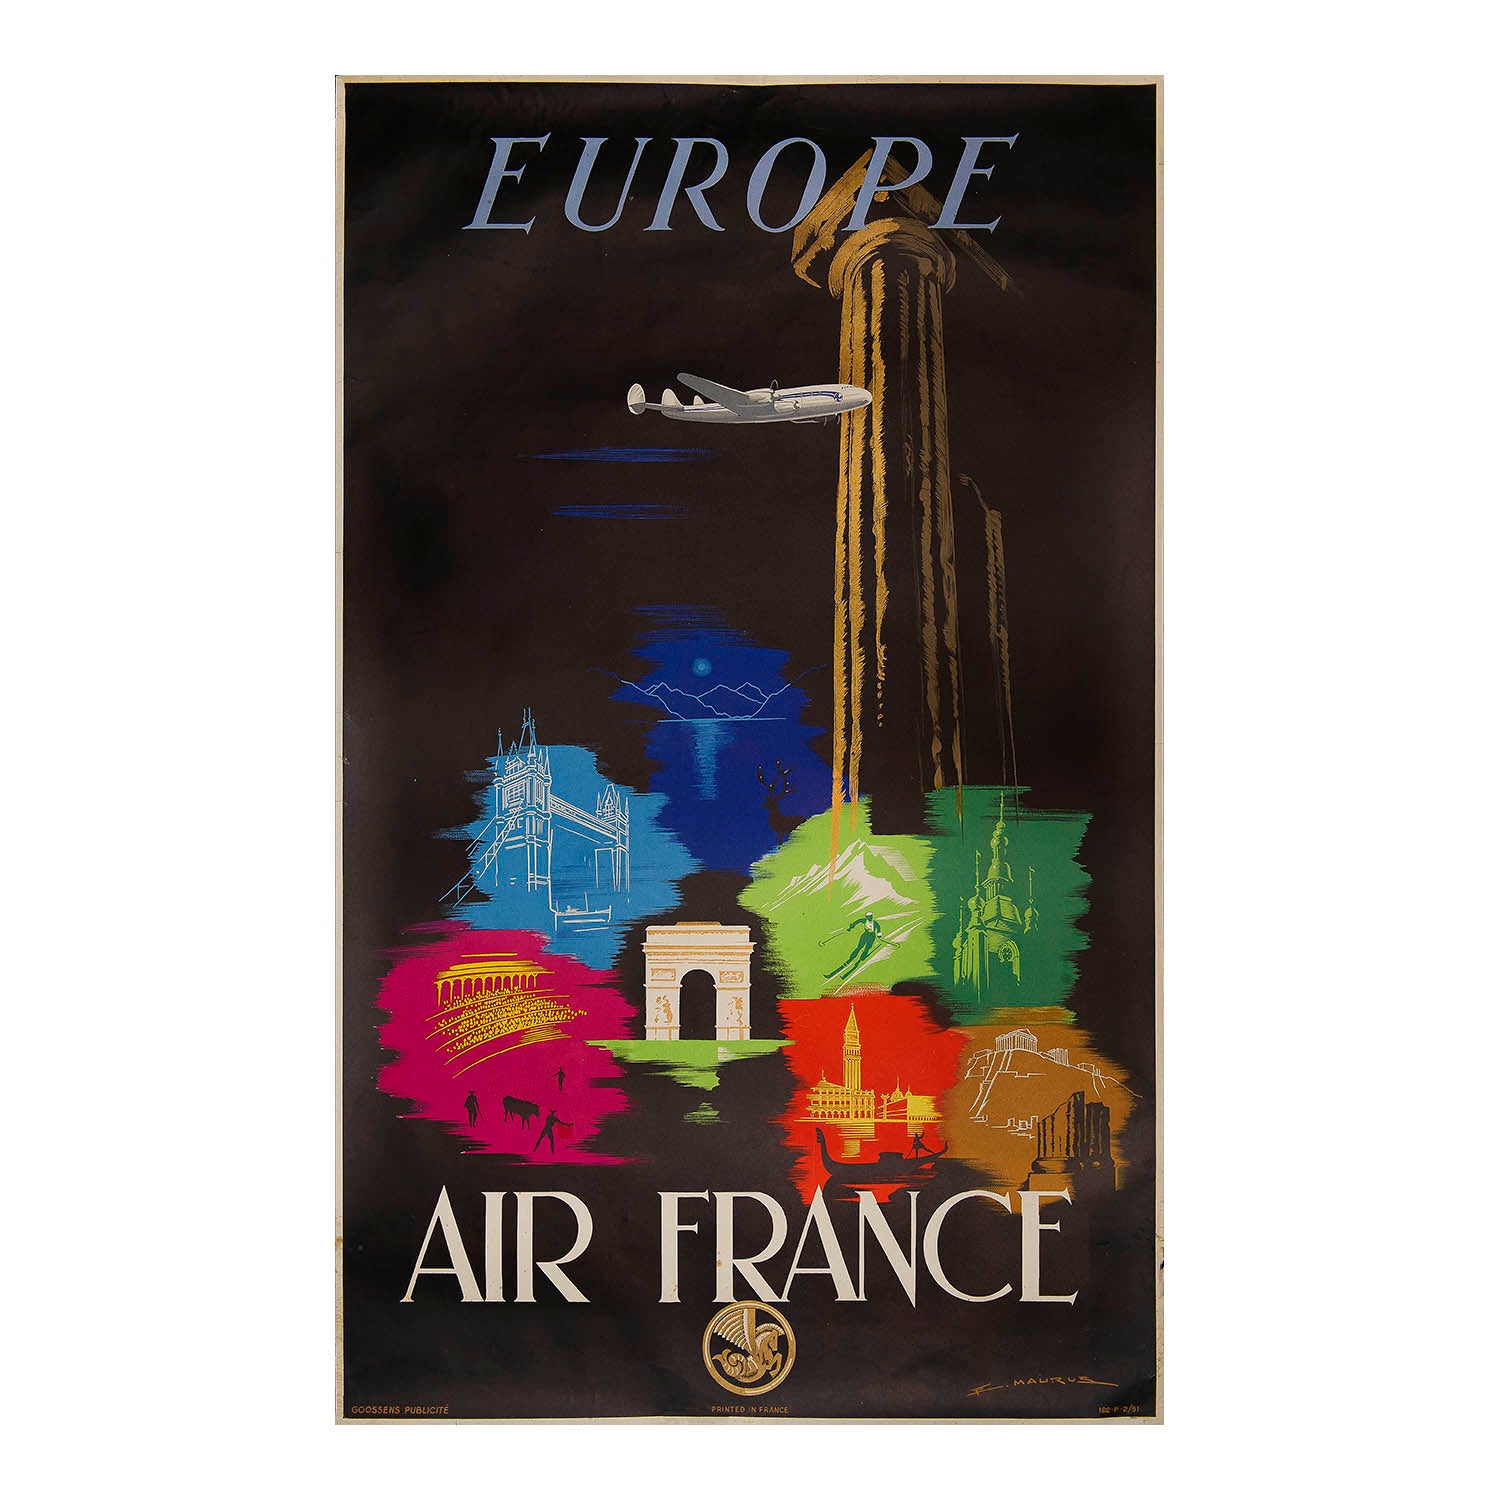 Air France poster ‘Europe’, designed by Edmond Maurus and printed in 1948. The vibrant design depicts some of Europe’s most famous landmarks, including London Bridge, the Arc de Triomphe de l'Étoile, the Doge’s Palace (Venice), the Acropolis of Athens, Alpine skiing, and the Scandinavian fjords.